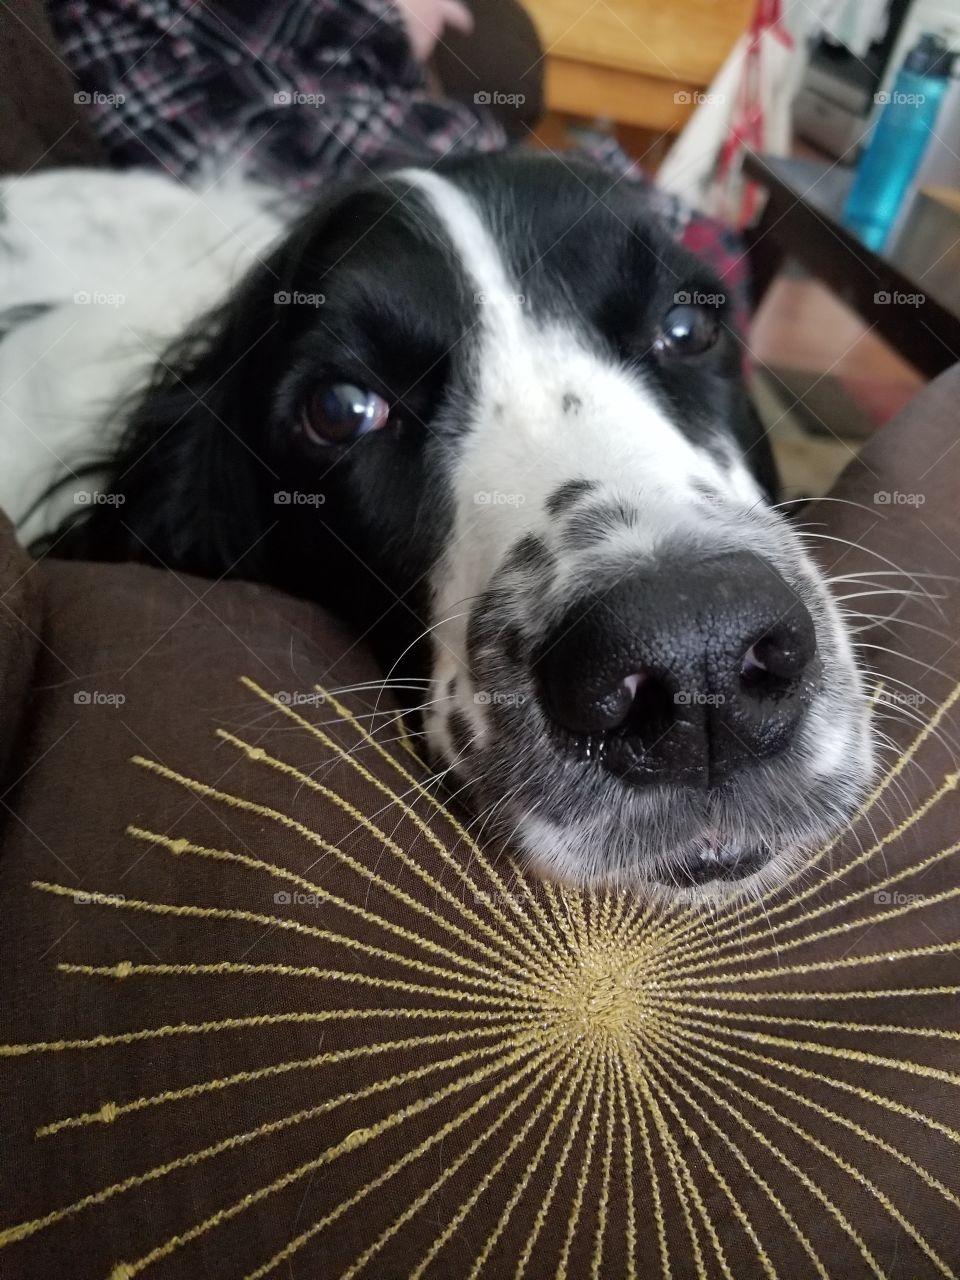 Our lovely English Springer Spaniel, with his smoosh face.